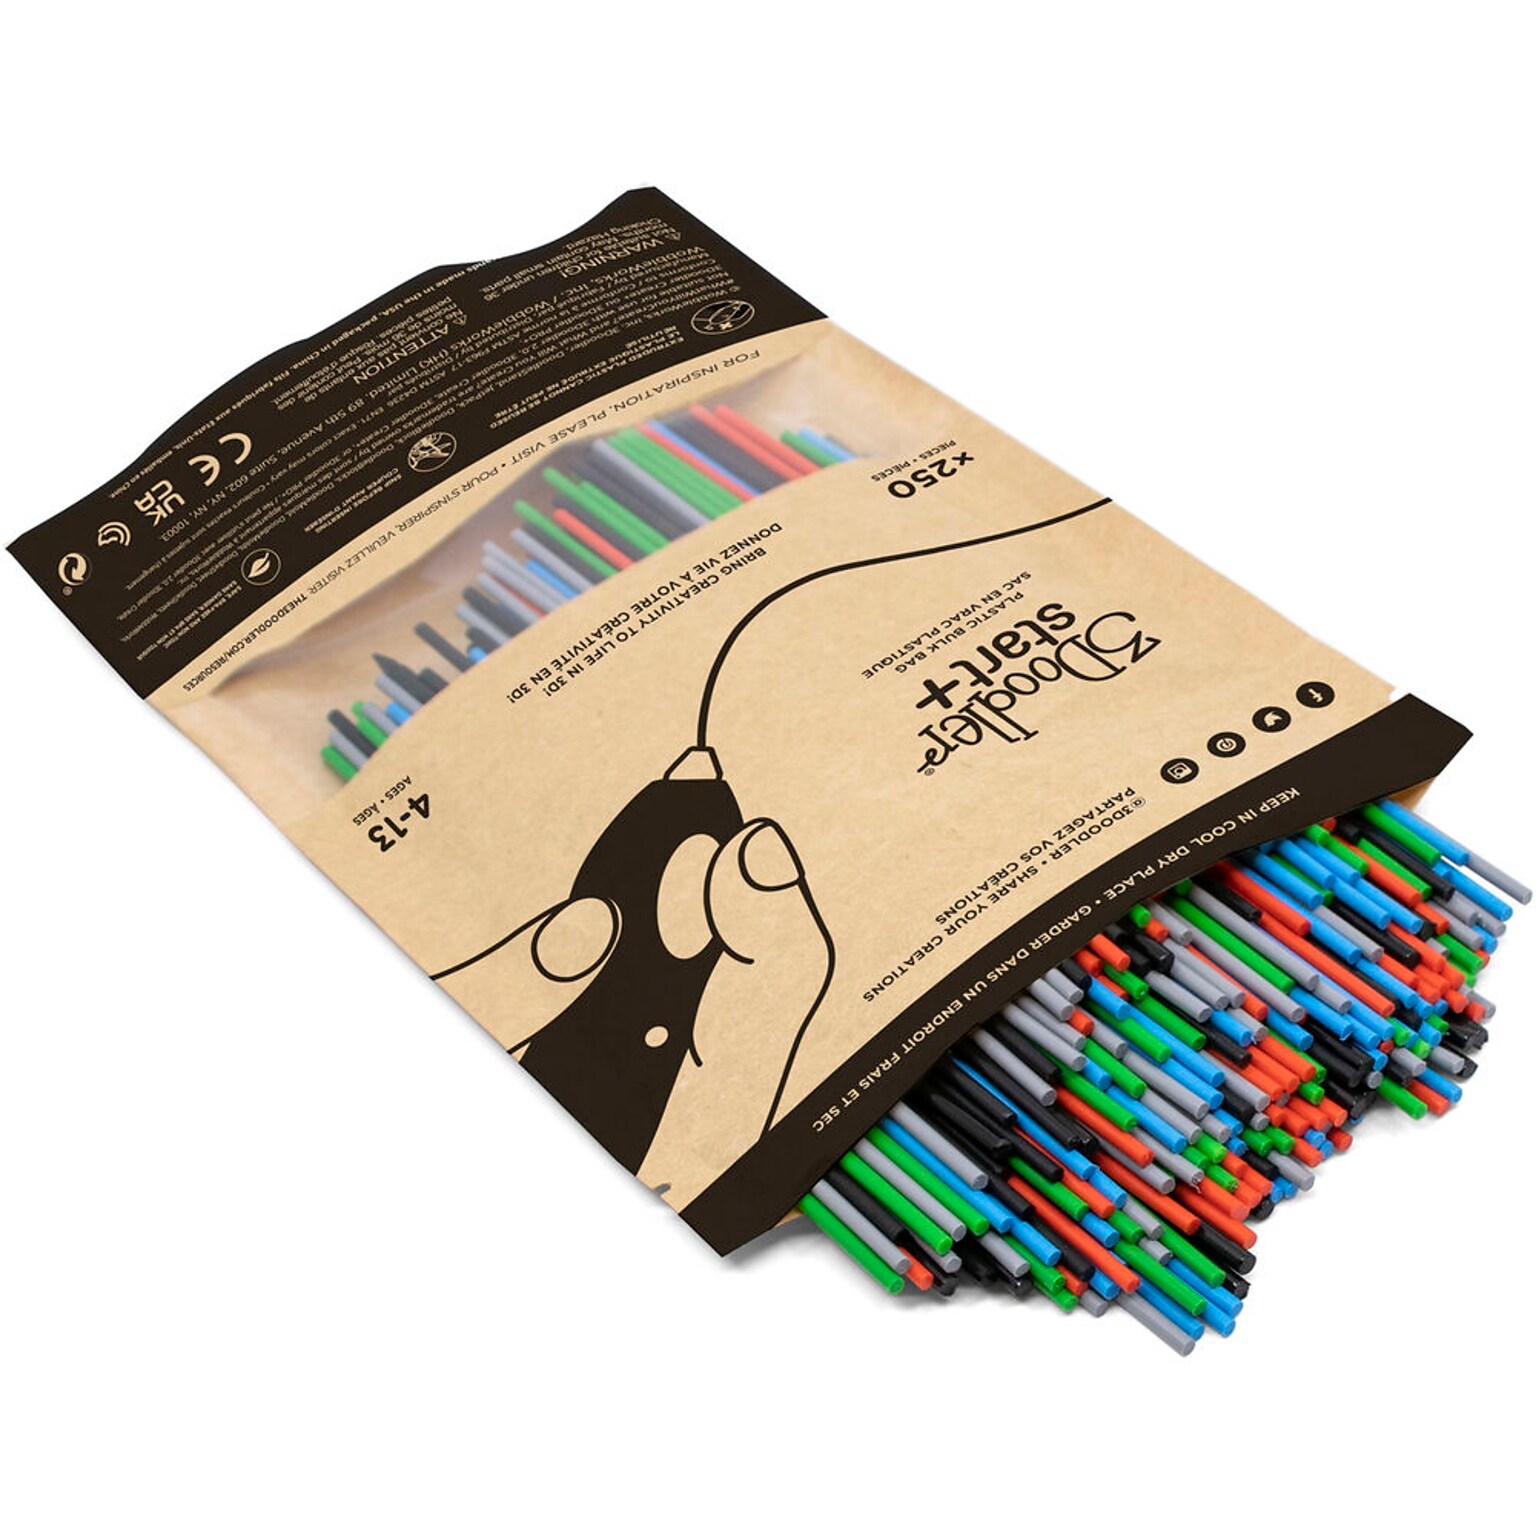 3Doodler Primary Pow Mixed Refill Bag for 3Doodler Build & Play and Start Kits, Assorted Colors (3DS-ECO-MIX2-250)